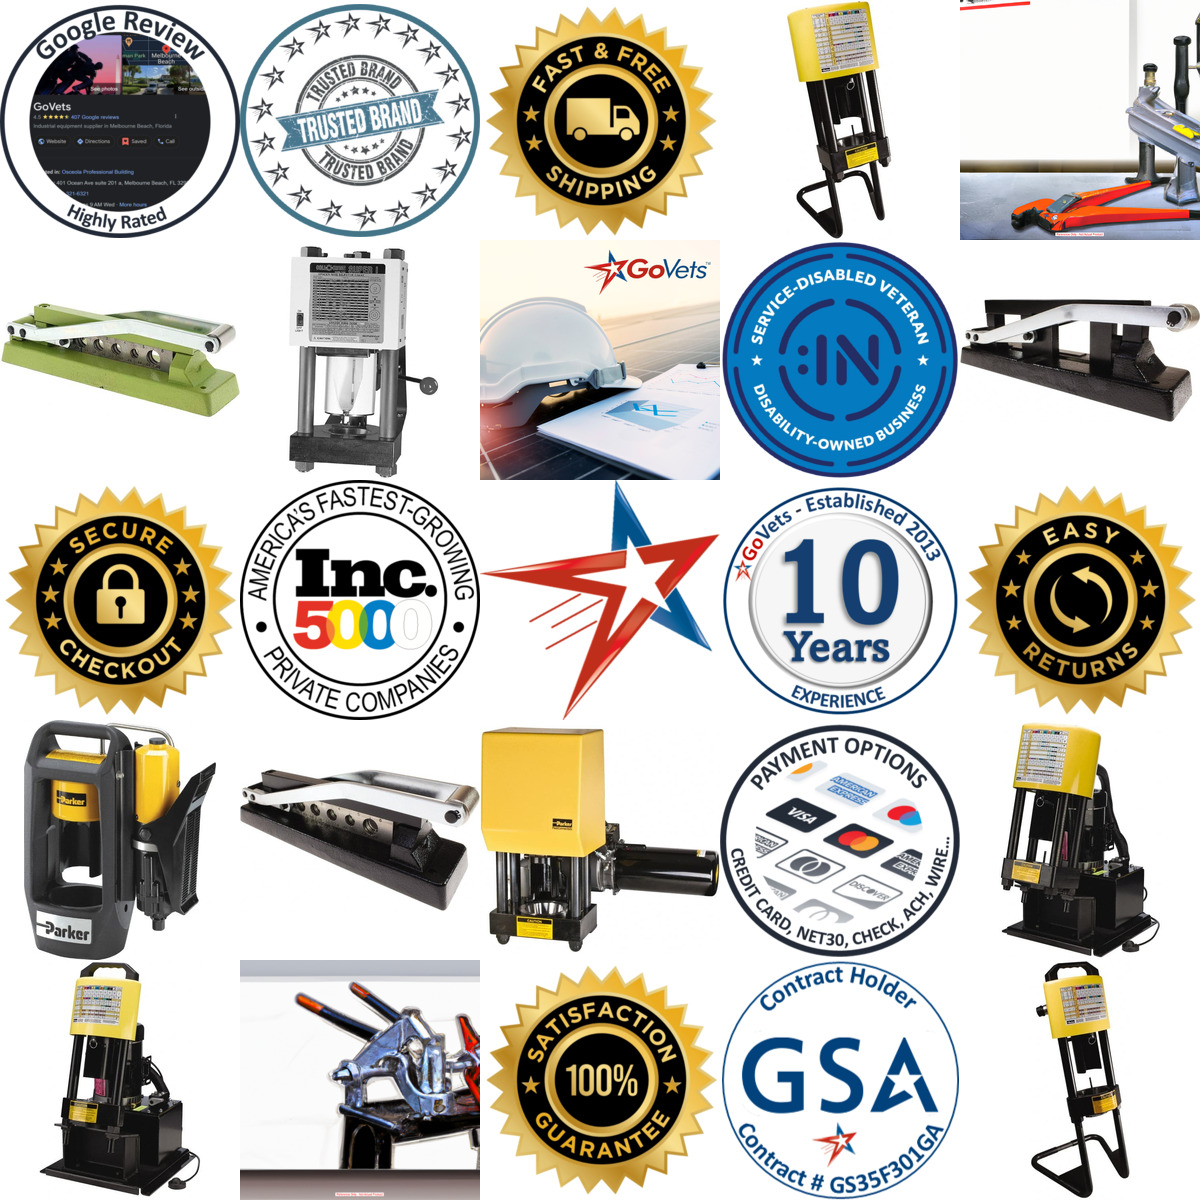 A selection of Bench Mount and Portable Hose Crimpers products on GoVets